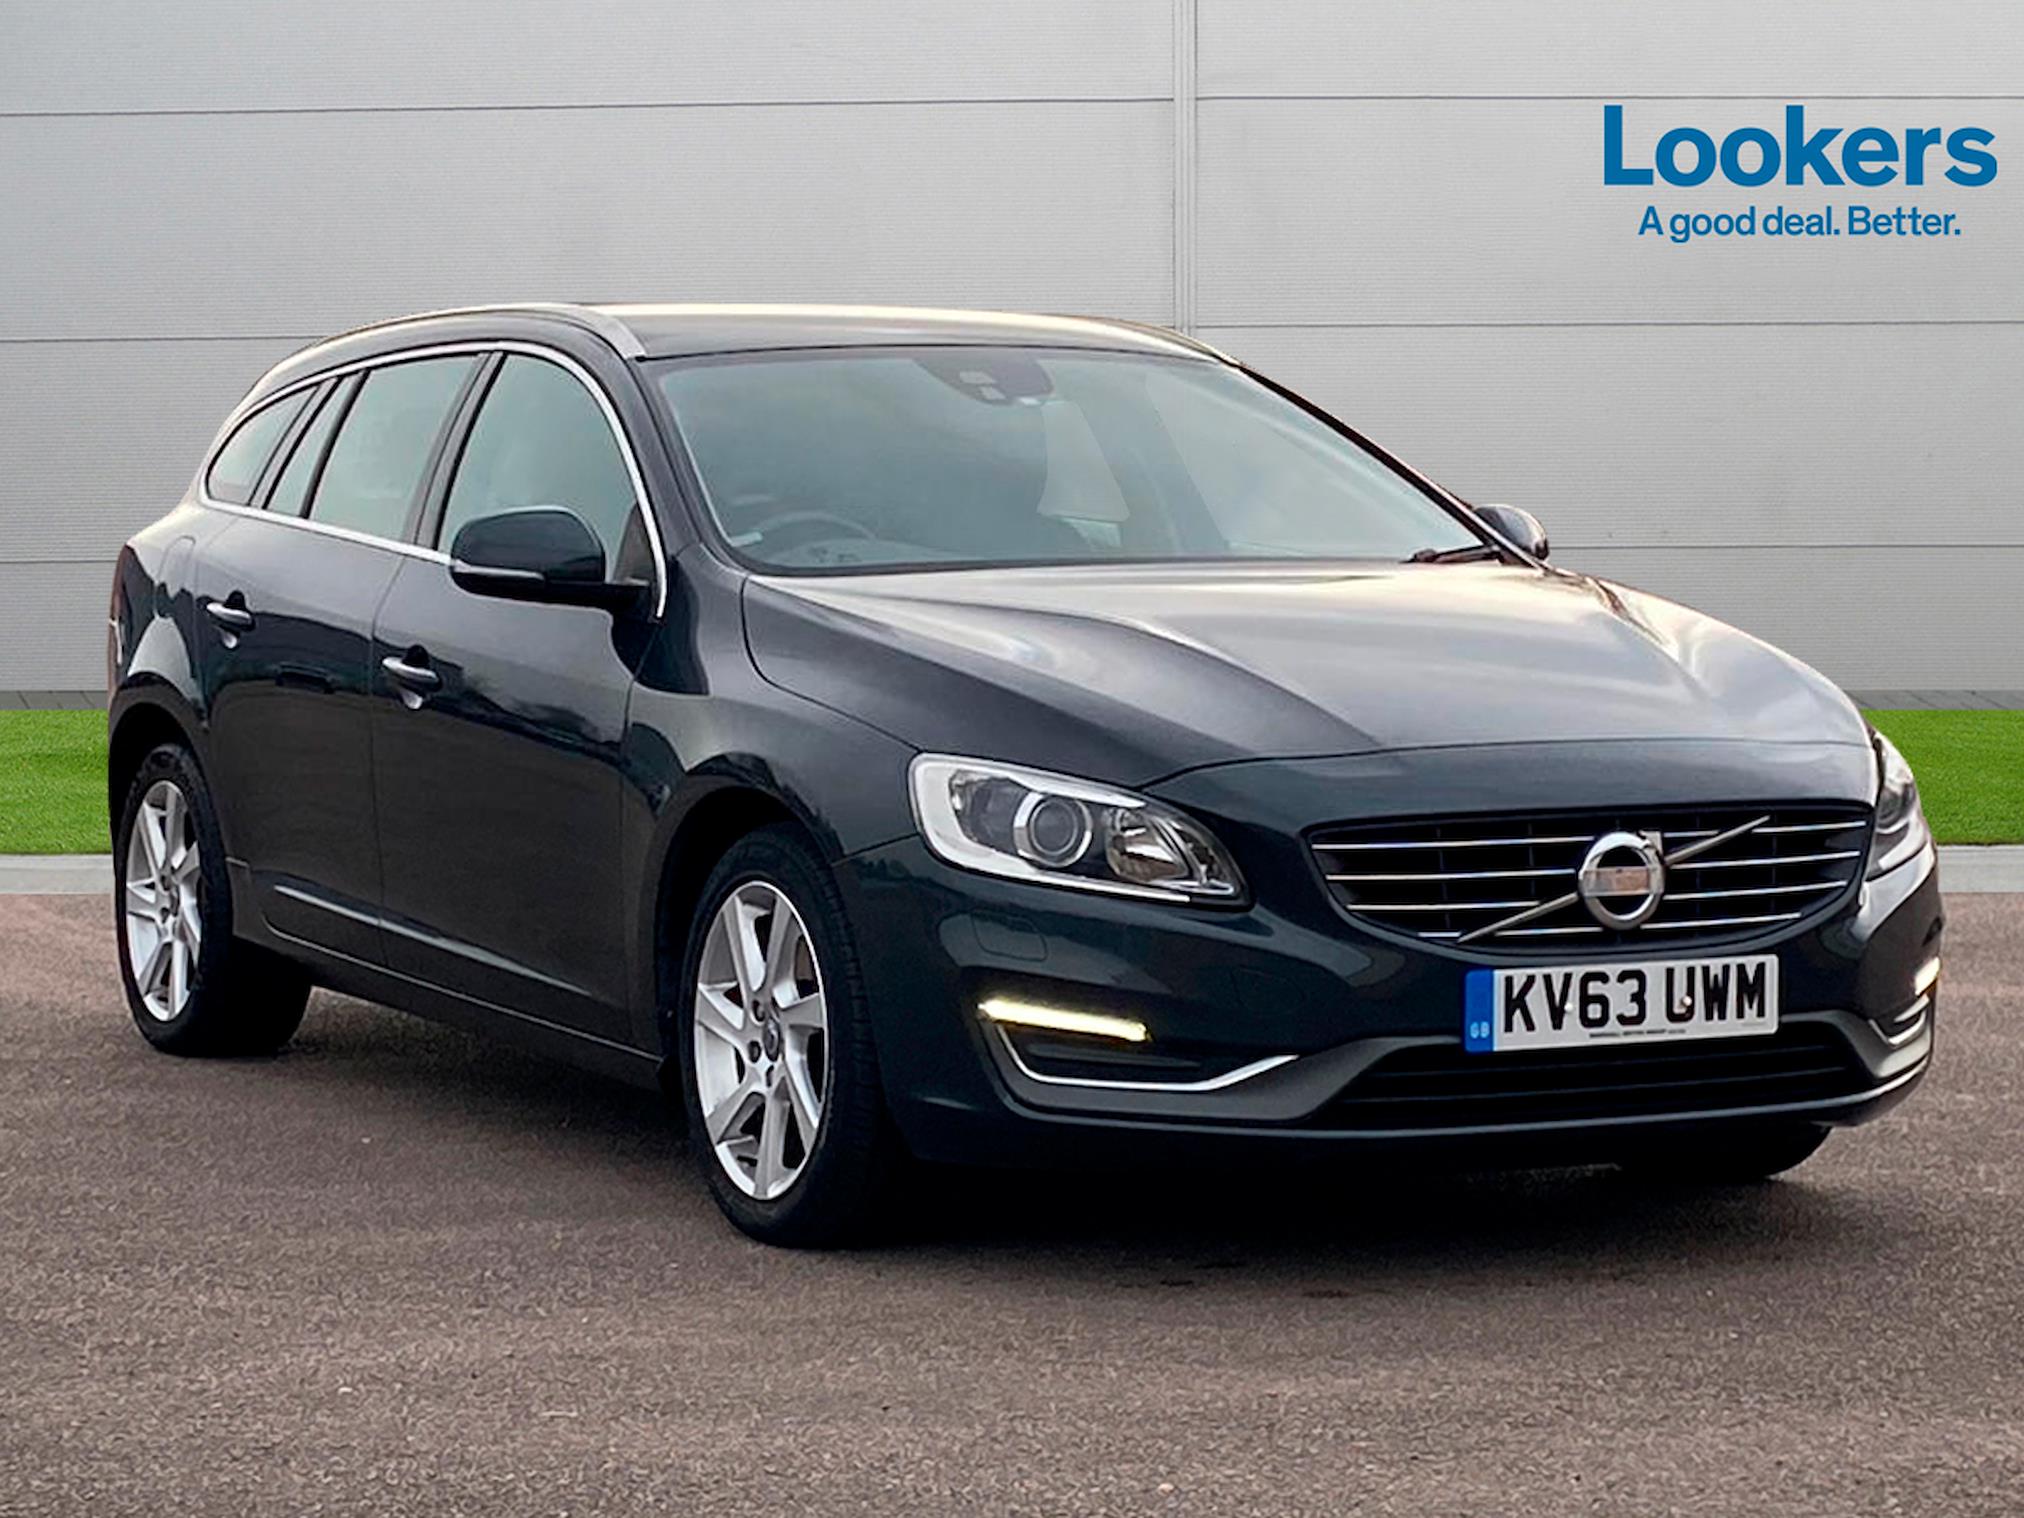 Used VOLVO V60 D4 [163] Se Lux Nav 5Dr Geartronic 2013